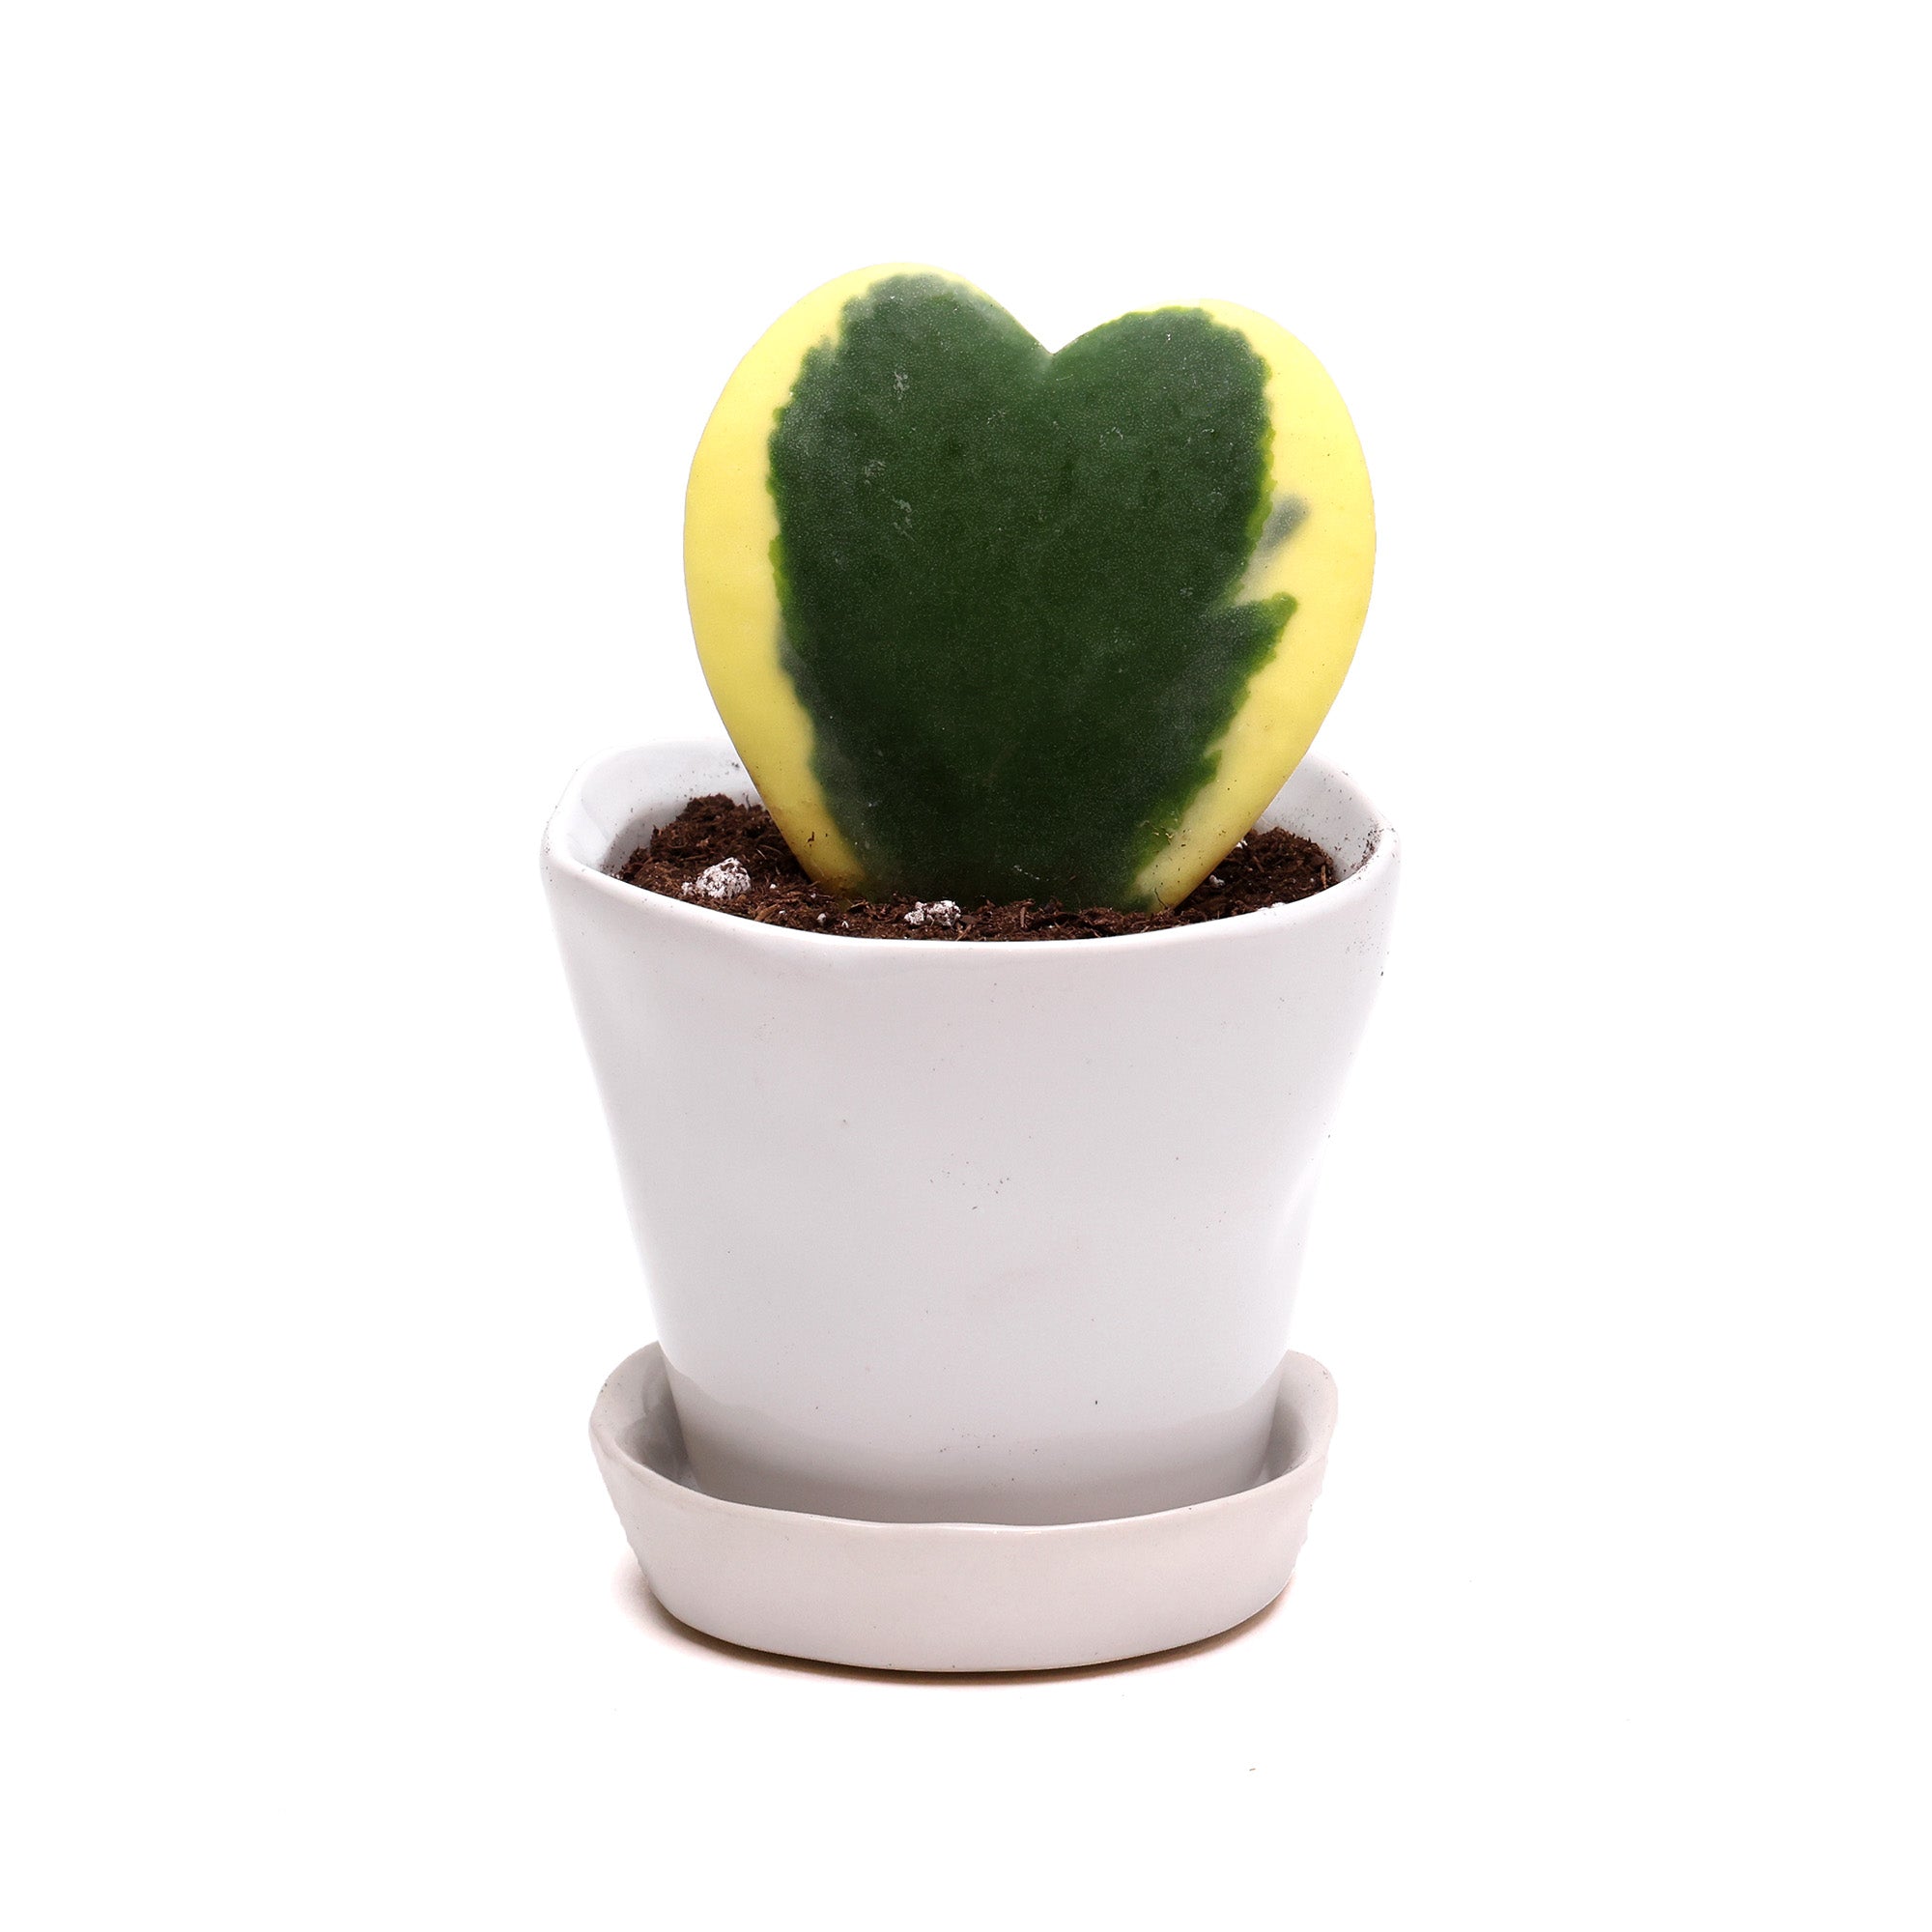 A Potted Hoya Kerri Variegated 2" in Tika from Chive Studio, with heart-shaped succulent plant with yellow and green leaves, sitting in a small white pot with a matching saucer, isolated on a white background.